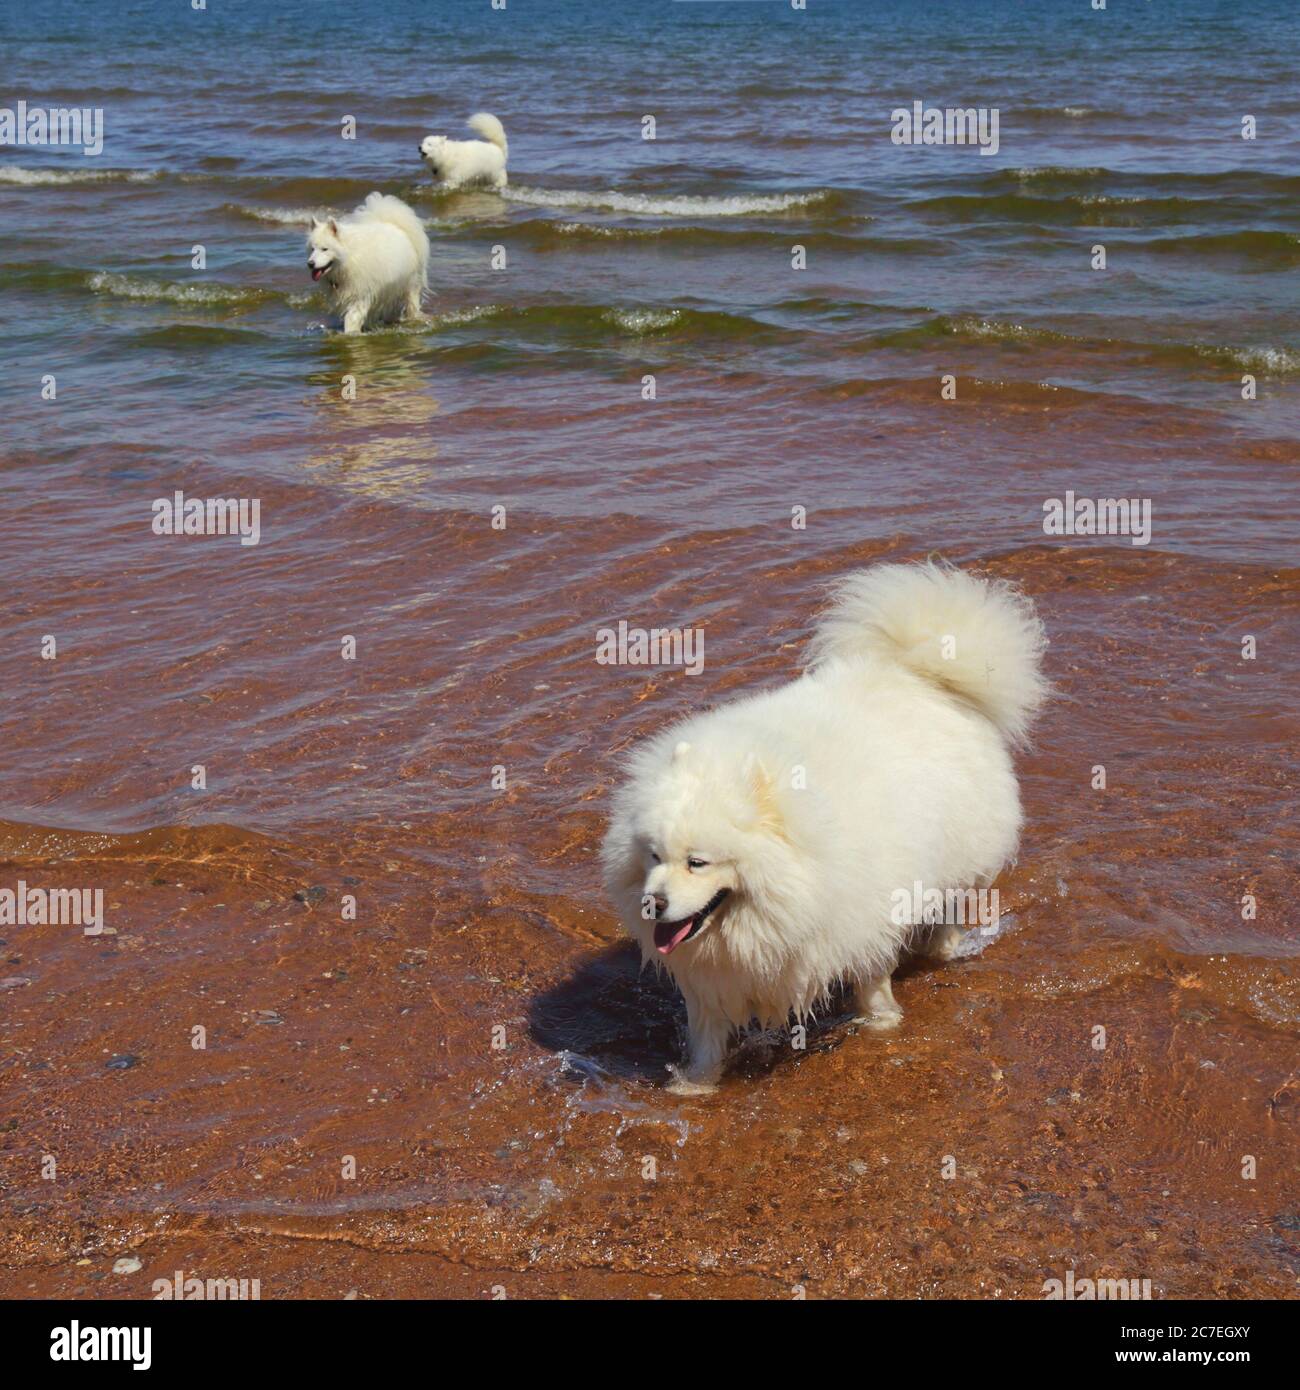 Group of Samoyed dogs on the beach in Devon Stock Photo